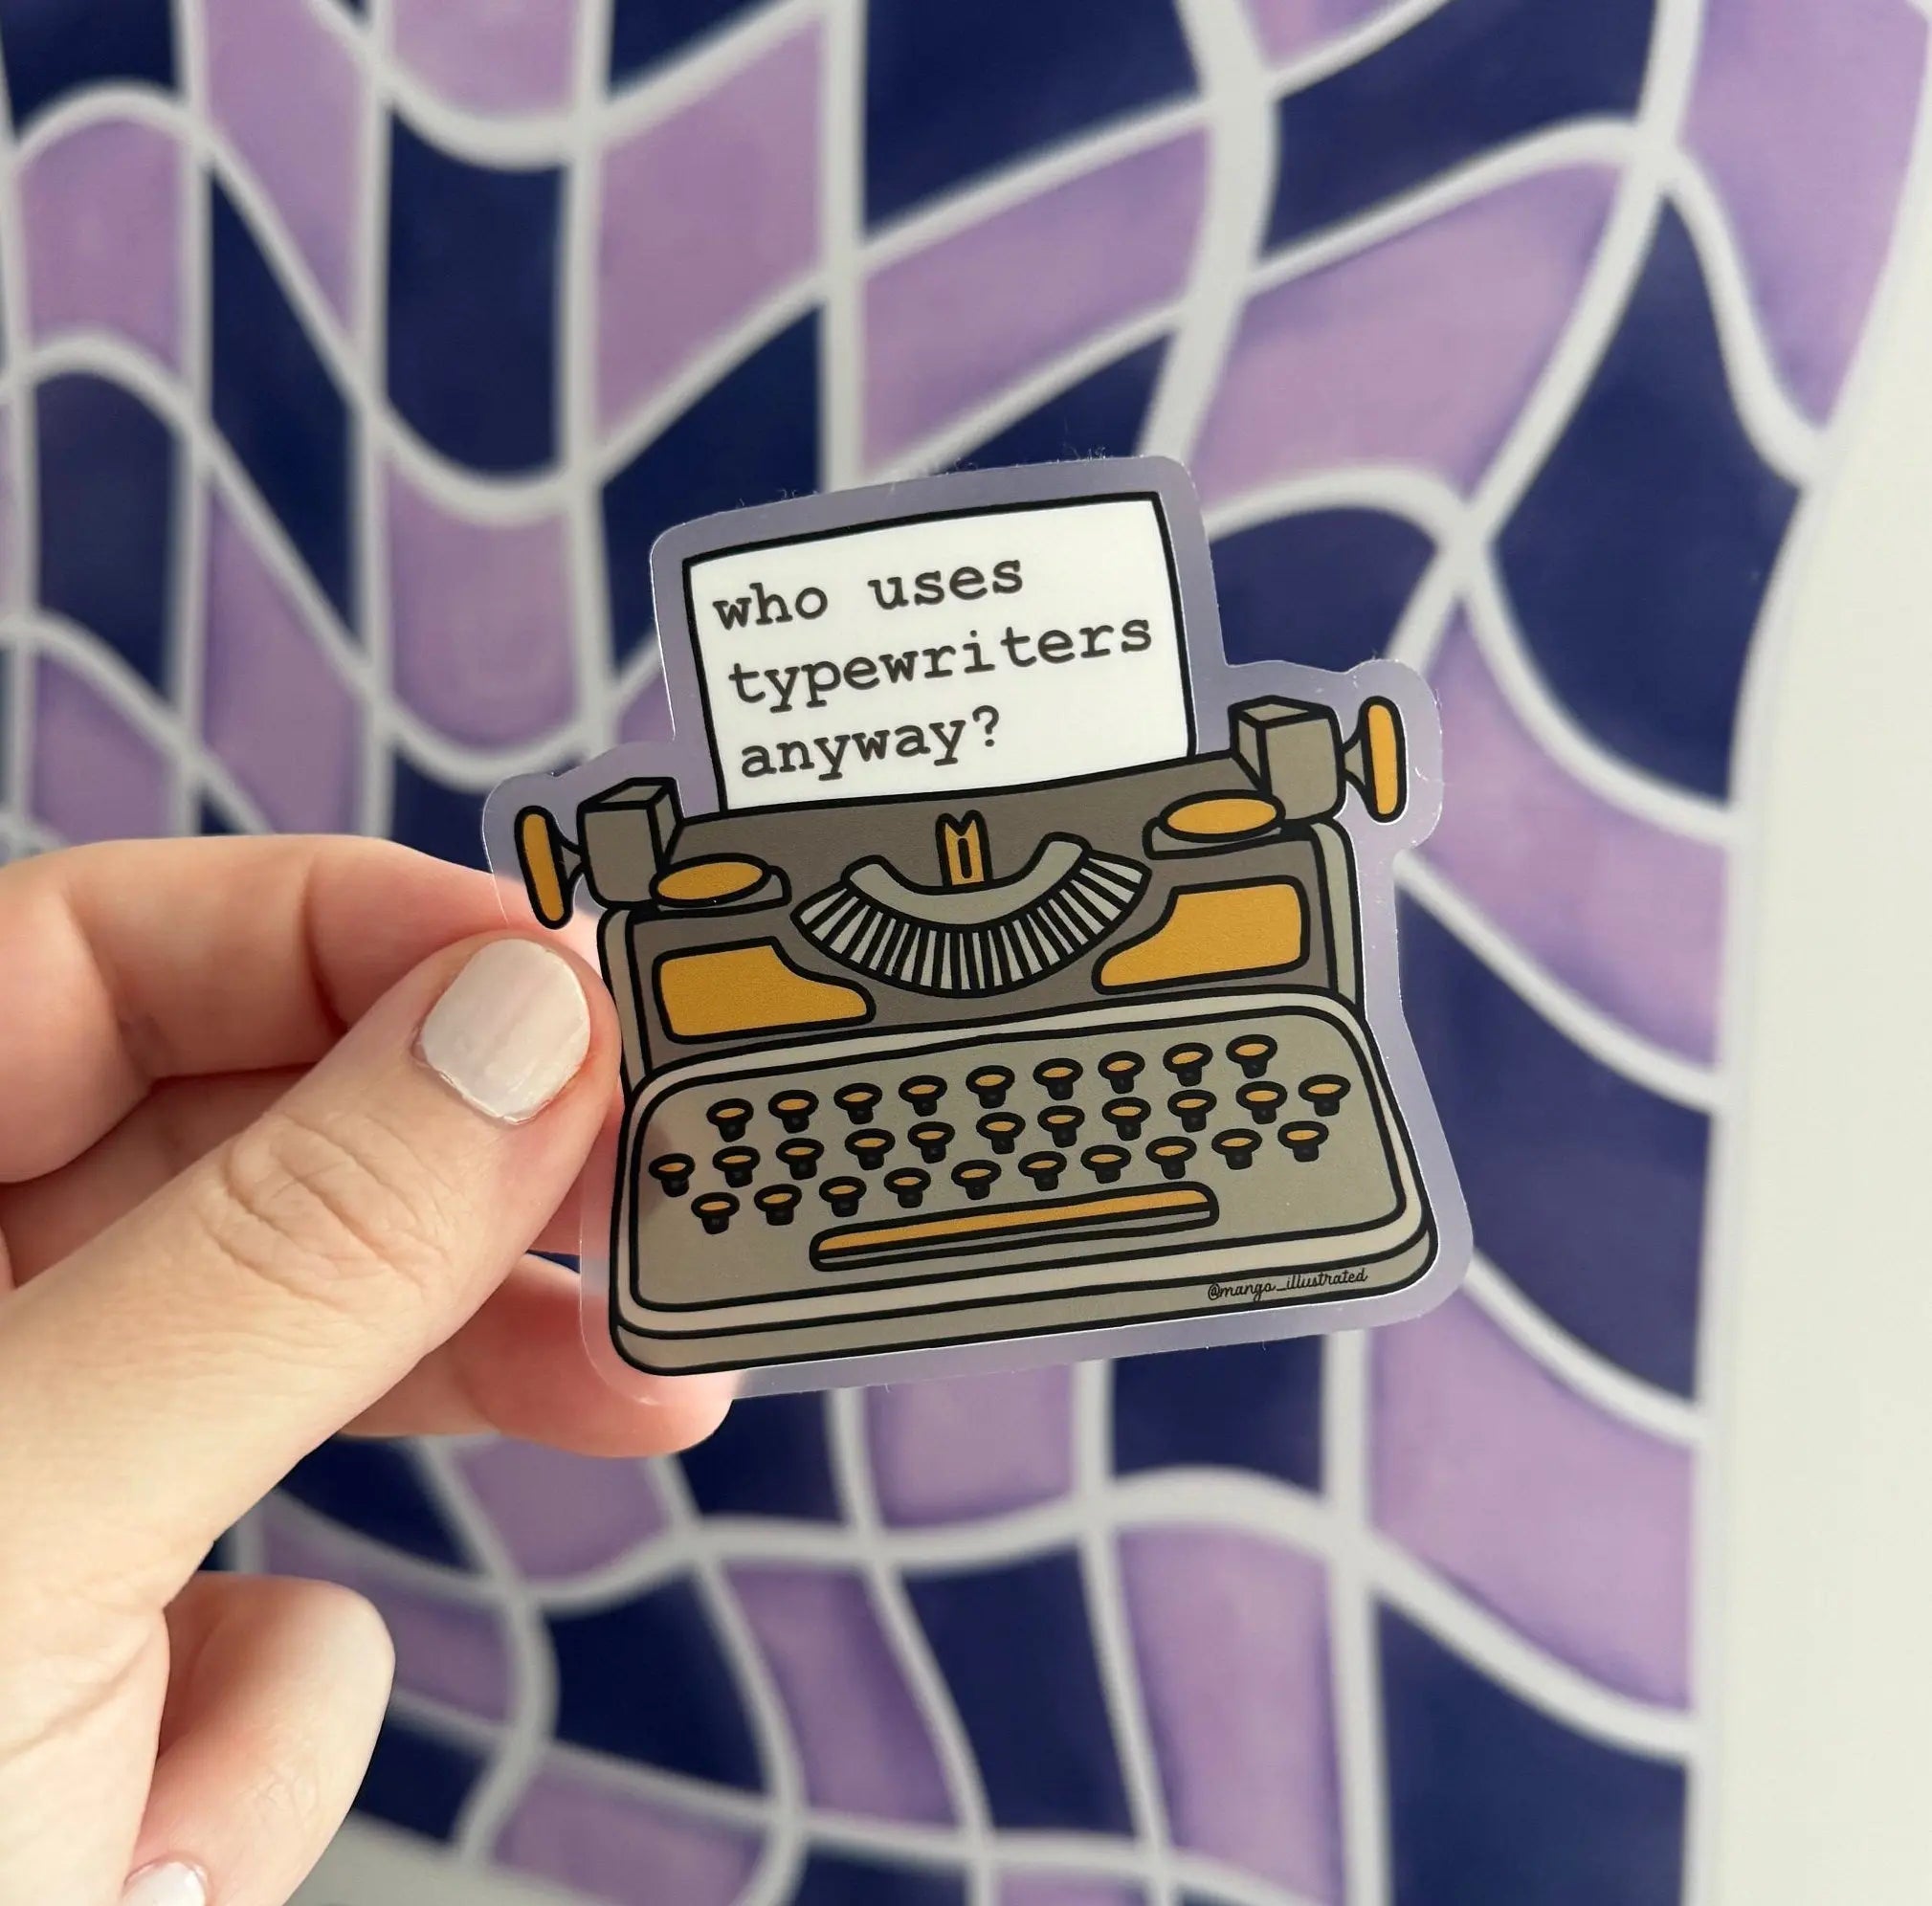 CLEAR Who uses typewriters anyway sticker MangoIllustrated